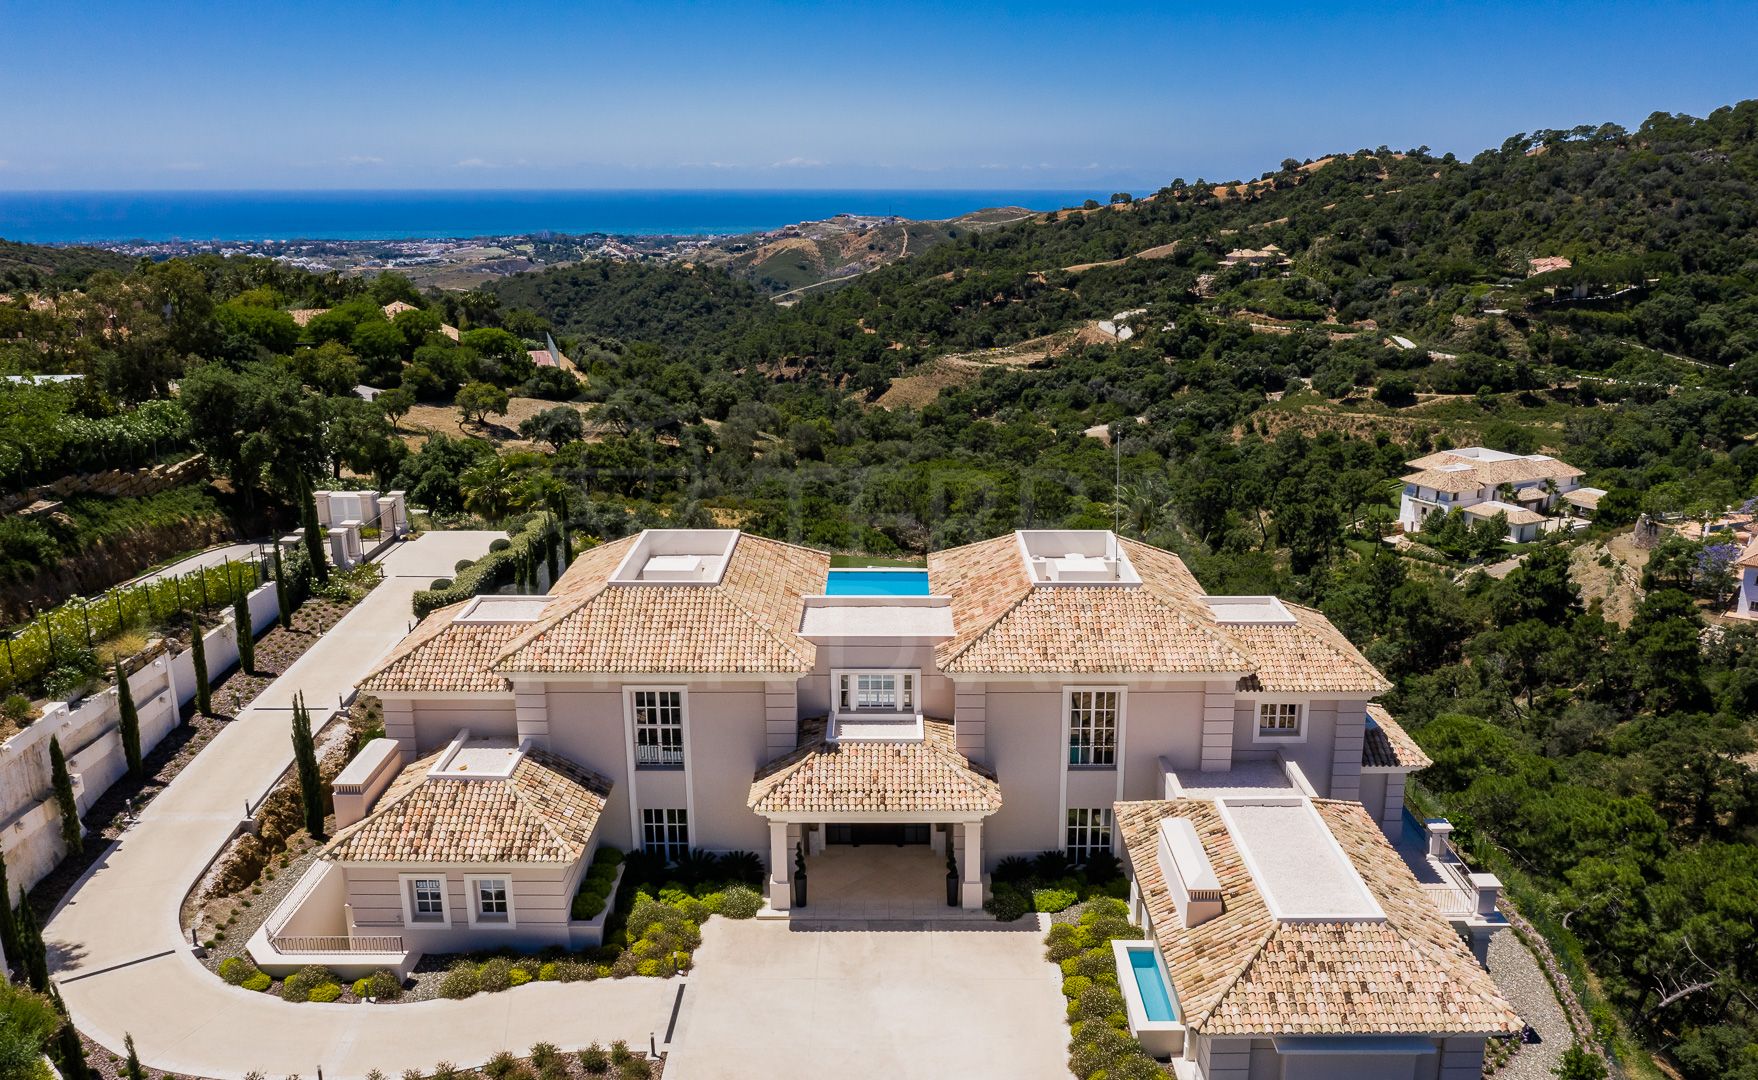 Elegant and luxurious villa for sale in La Zagaleta with panoramic sea views